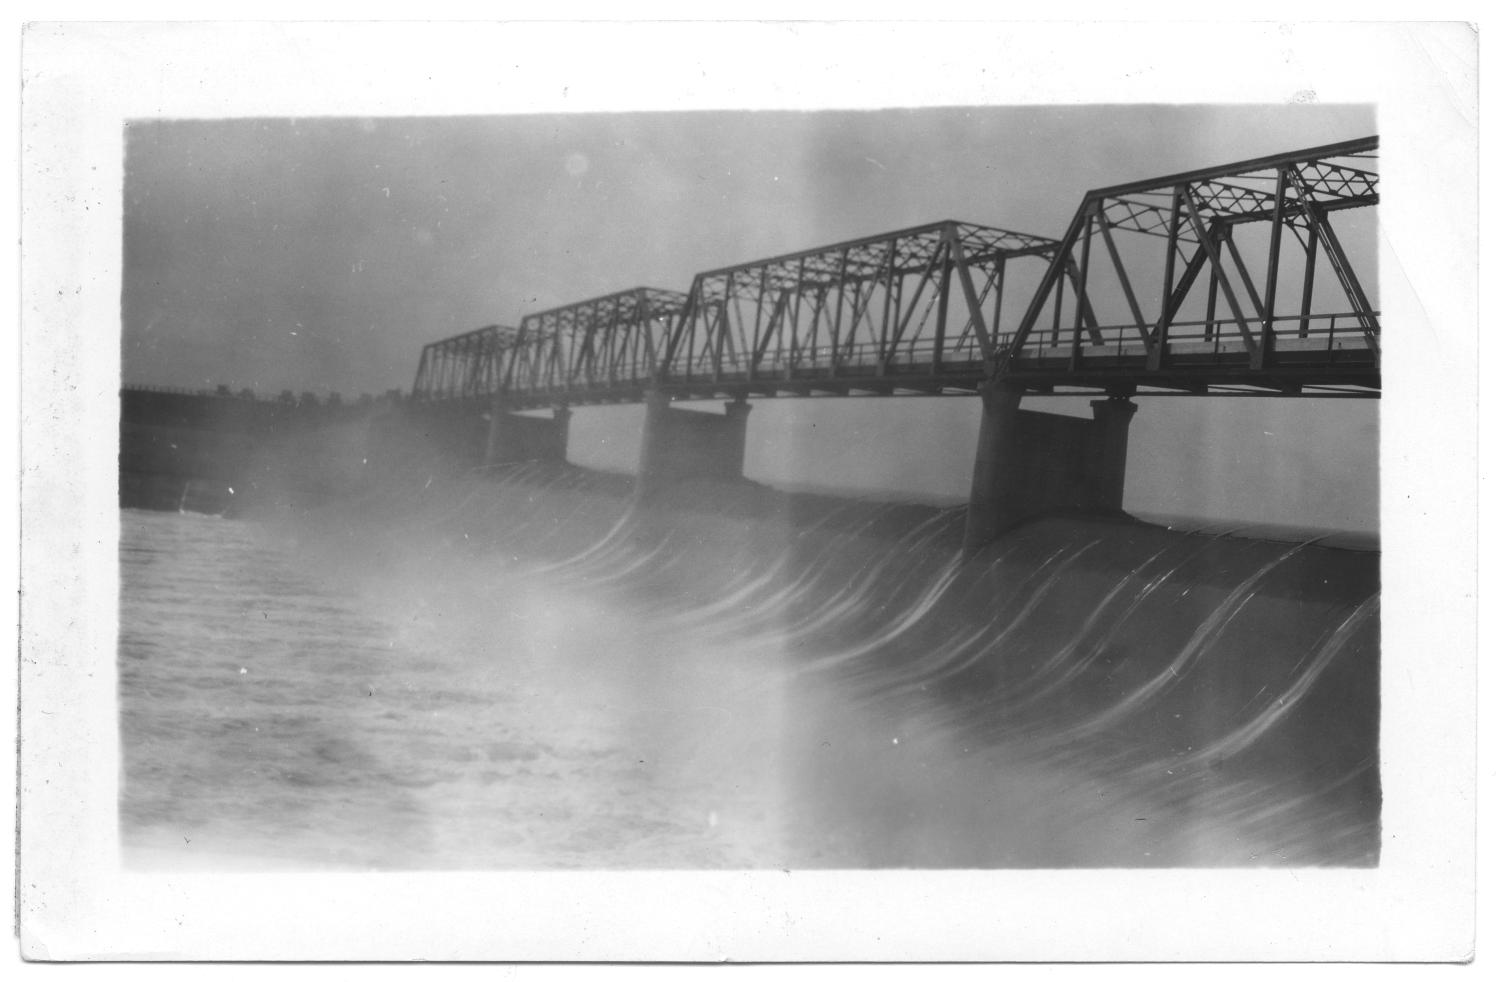 [Spillway at Lake Dallas]
                                                
                                                    [Sequence #]: 1 of 2
                                                